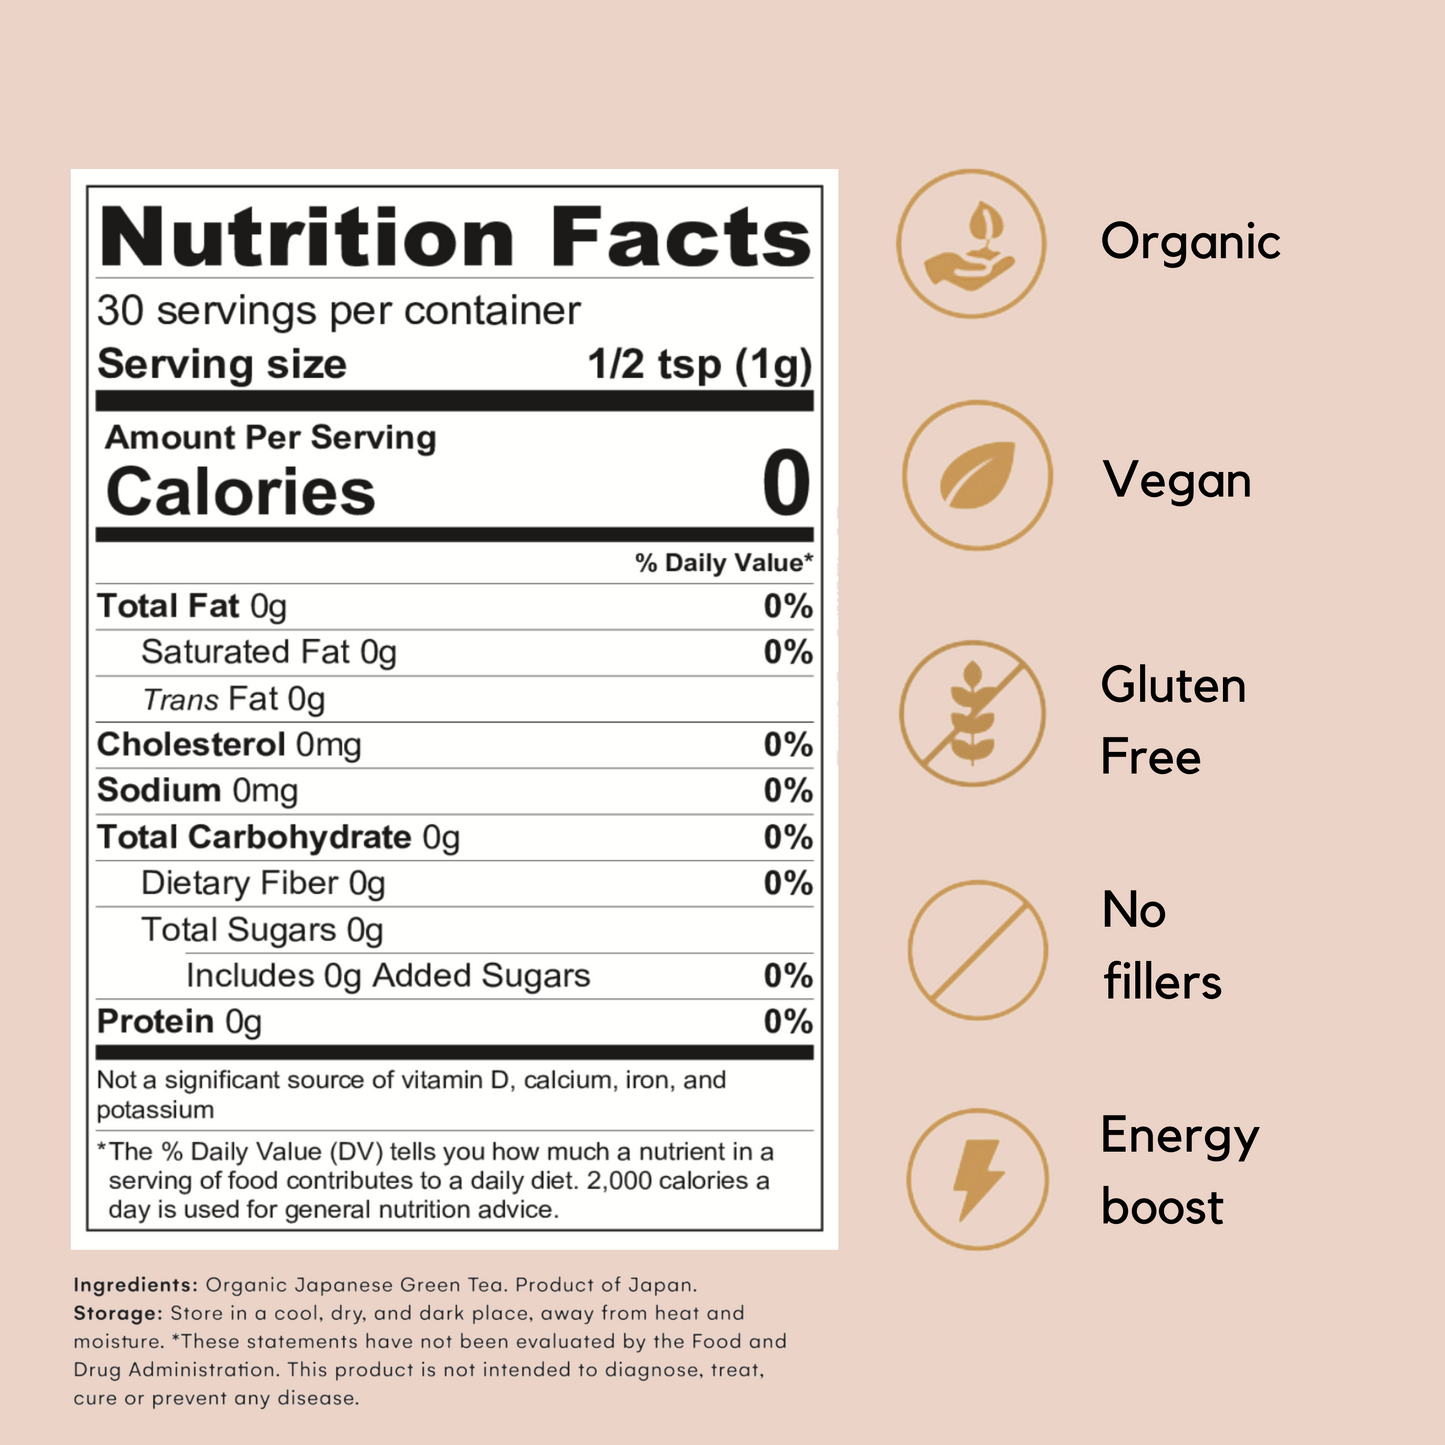 This image displays the nutrition facts per container. Greenboxed matcha contains 0 calories per serving. It also has different images with text describing some properties of the product. Some of the properties of the greenboxed matcha are, organic, vegan, gluten free, no fillers and energy boost. Also states this is an organic Japanese green tea product of Japan. The FDA disclaimer is stated